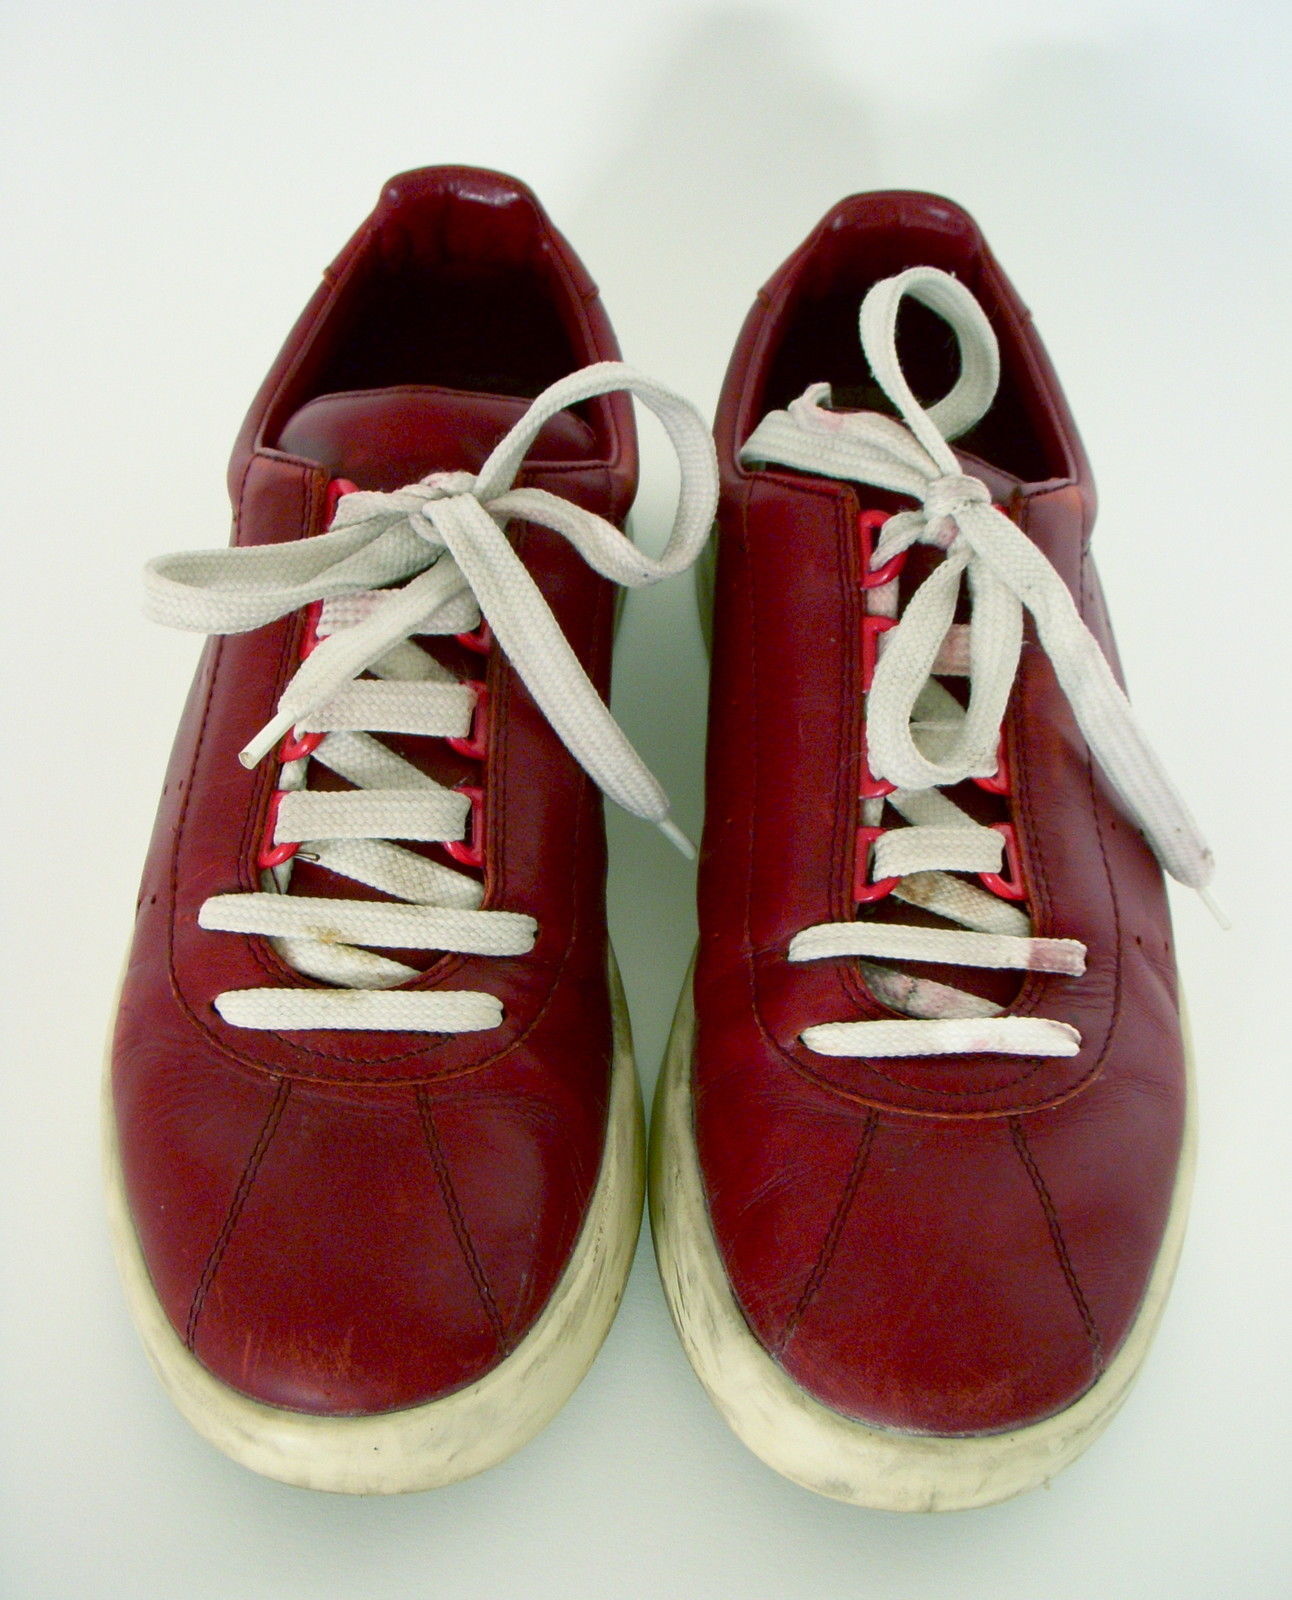 *MARC JACOBS* MAINLINE LEATHER SNEAKERS VANS CONVERSE-ITALY